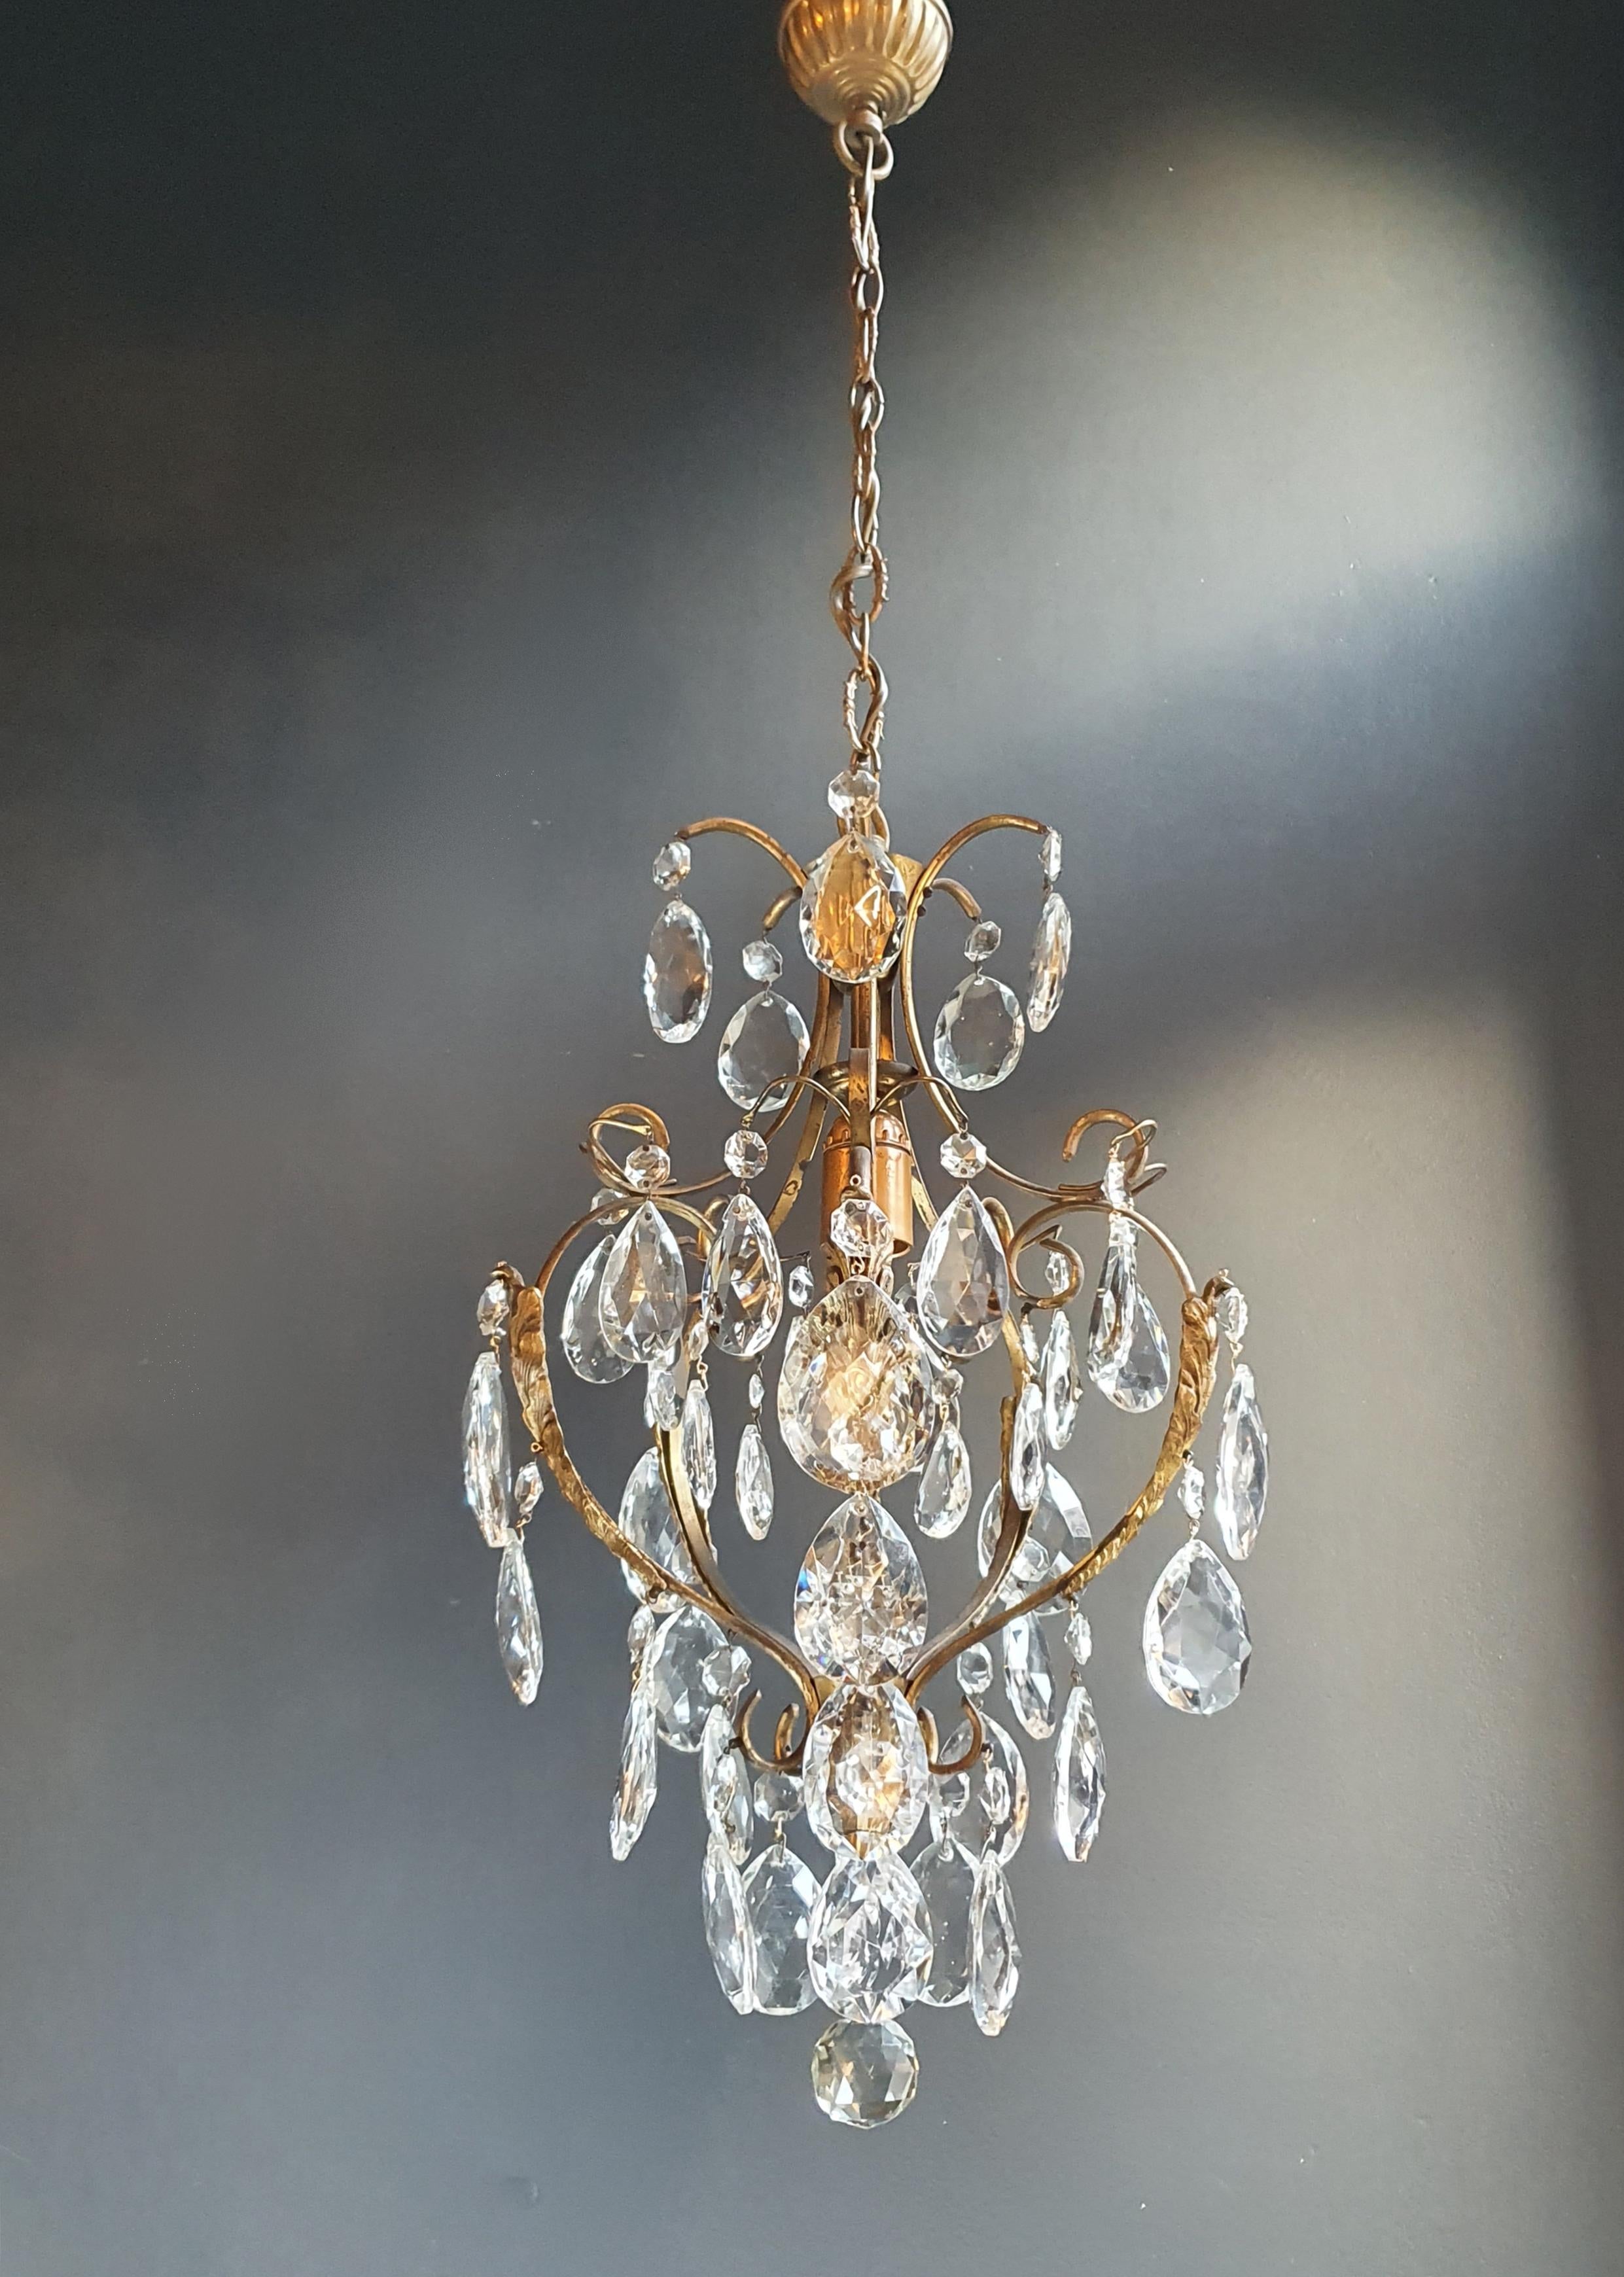 Authentic Preserved Chandelier from the 1940s: A Glimpse into the Past

Step into the vintage elegance of the 1940s with this original preserved chandelier that has been meticulously restored. While its historical essence is cherished, the cabling